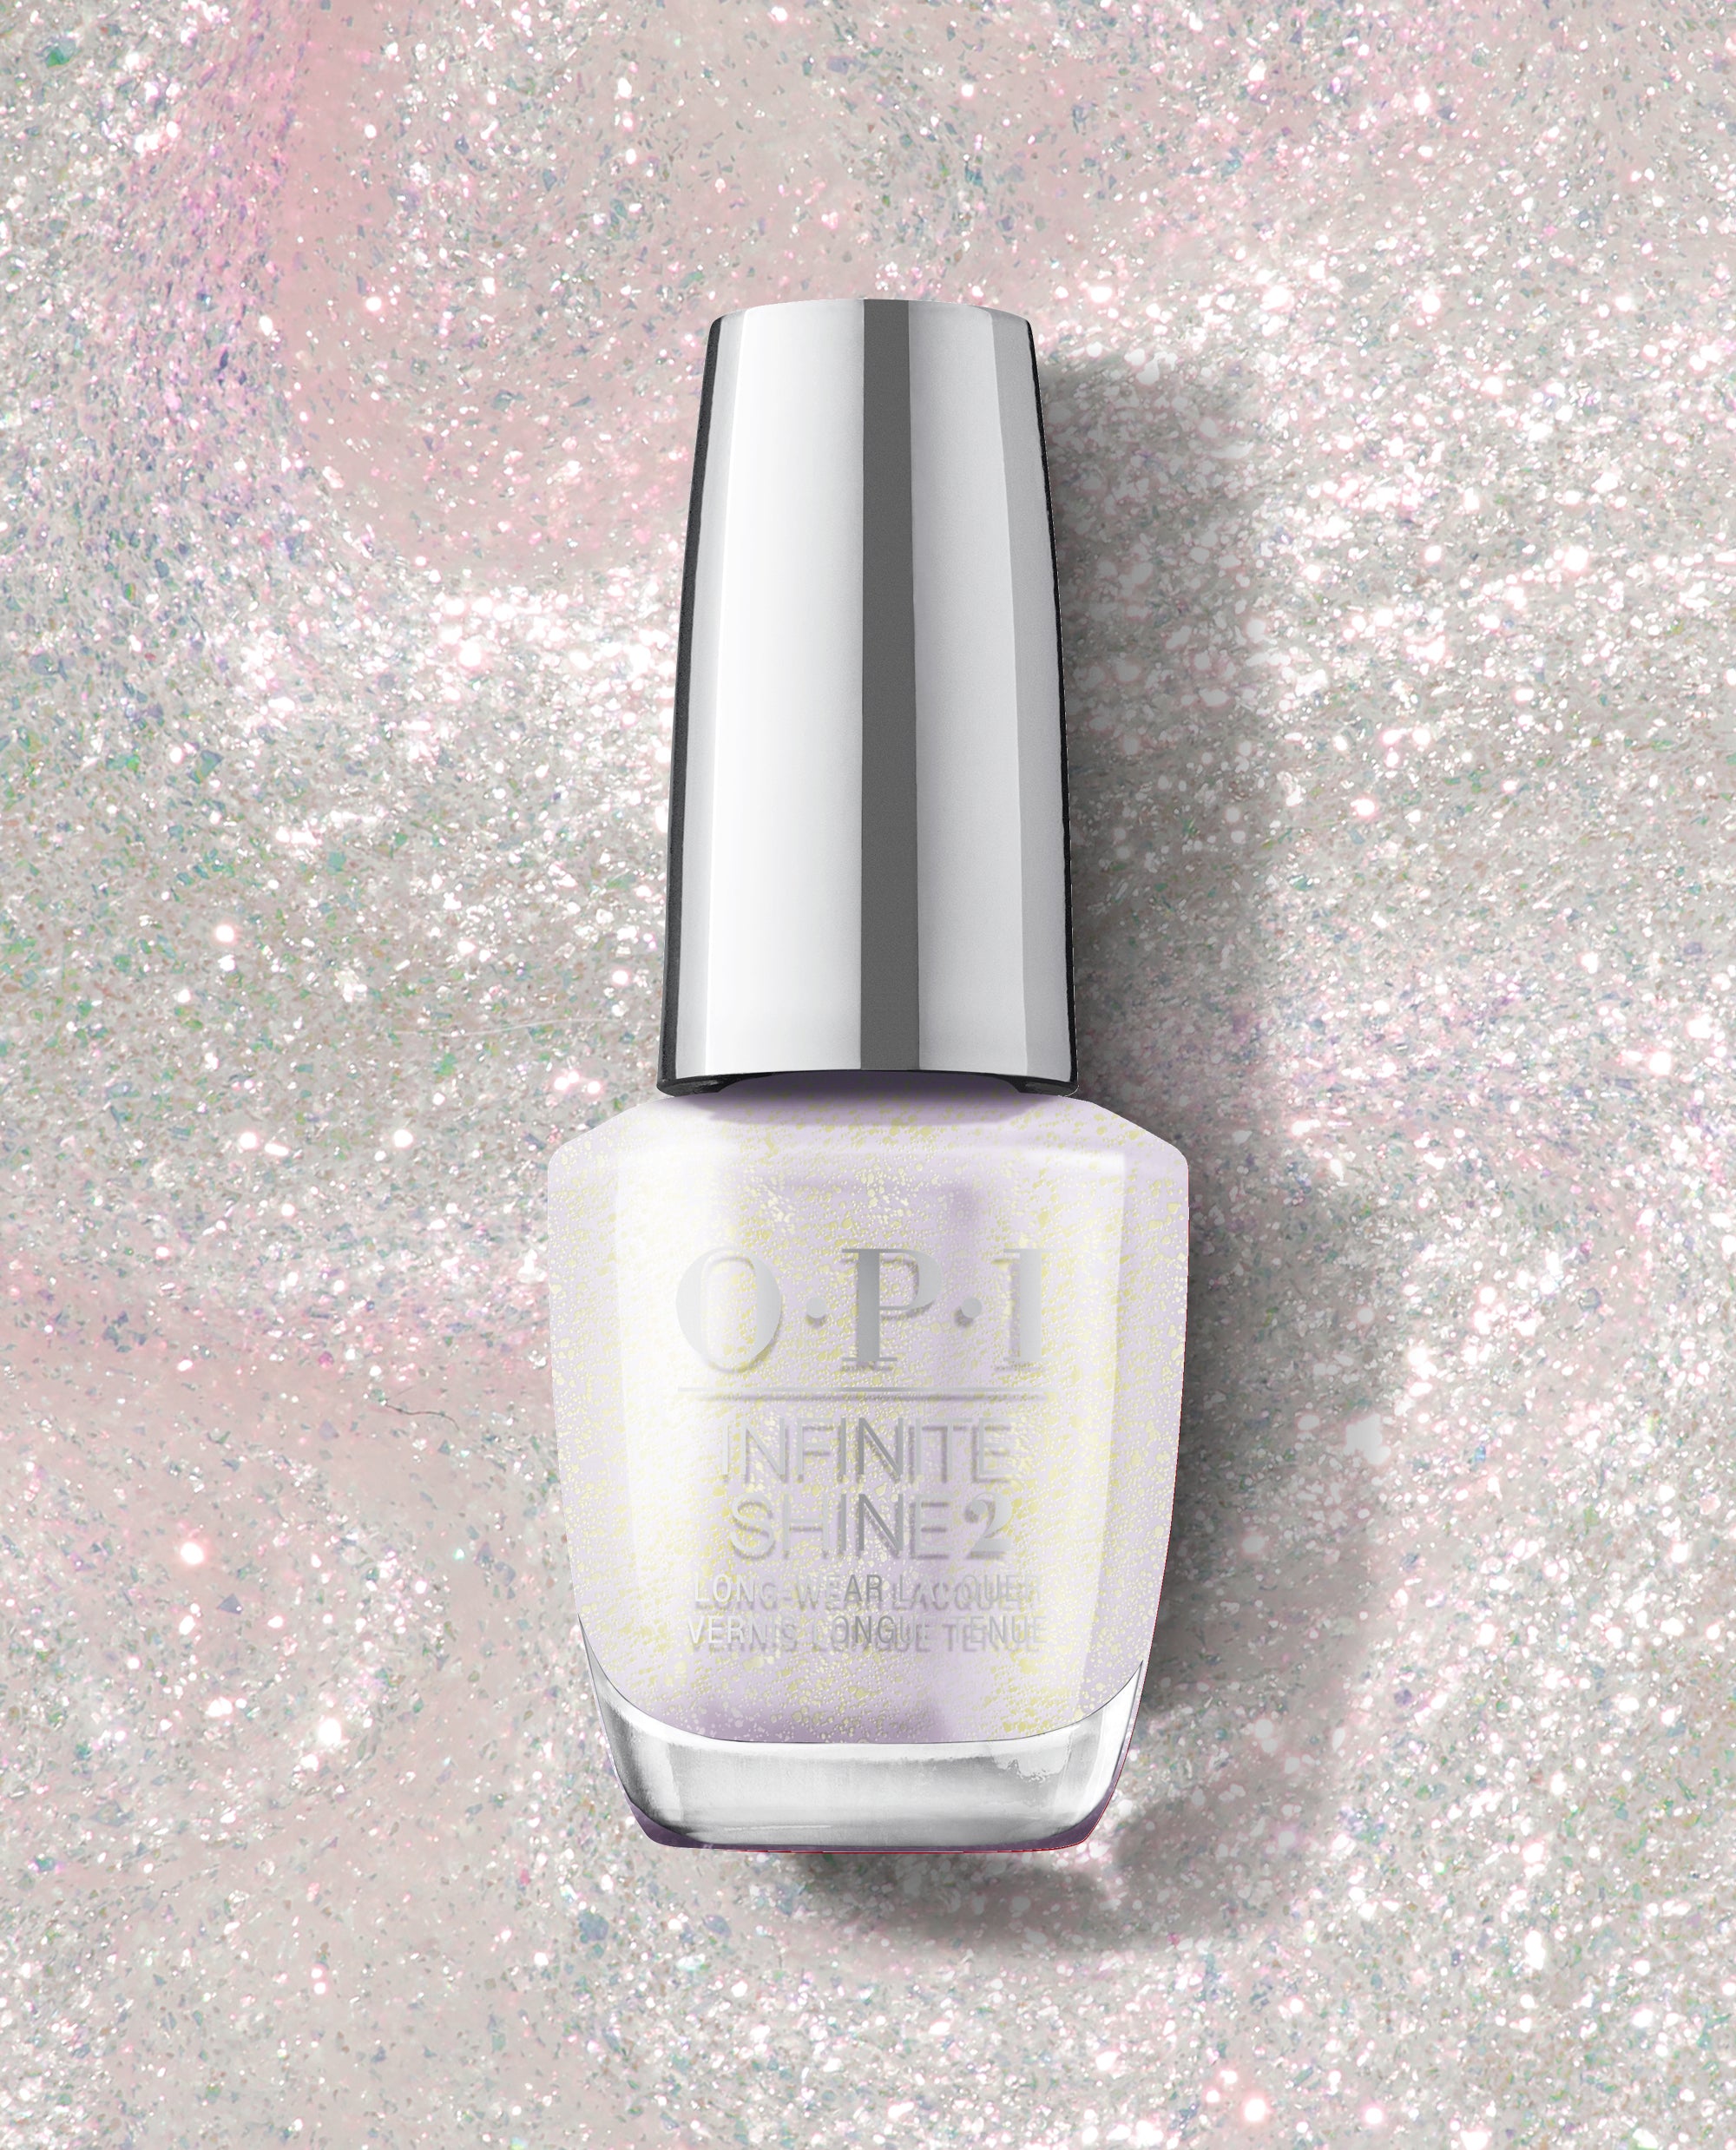 Buy BEROMT REFLECTIVE CHAMPAGNE GLITTER NAIL POLISH BNP 312 Online at Low  Prices in India - Amazon.in